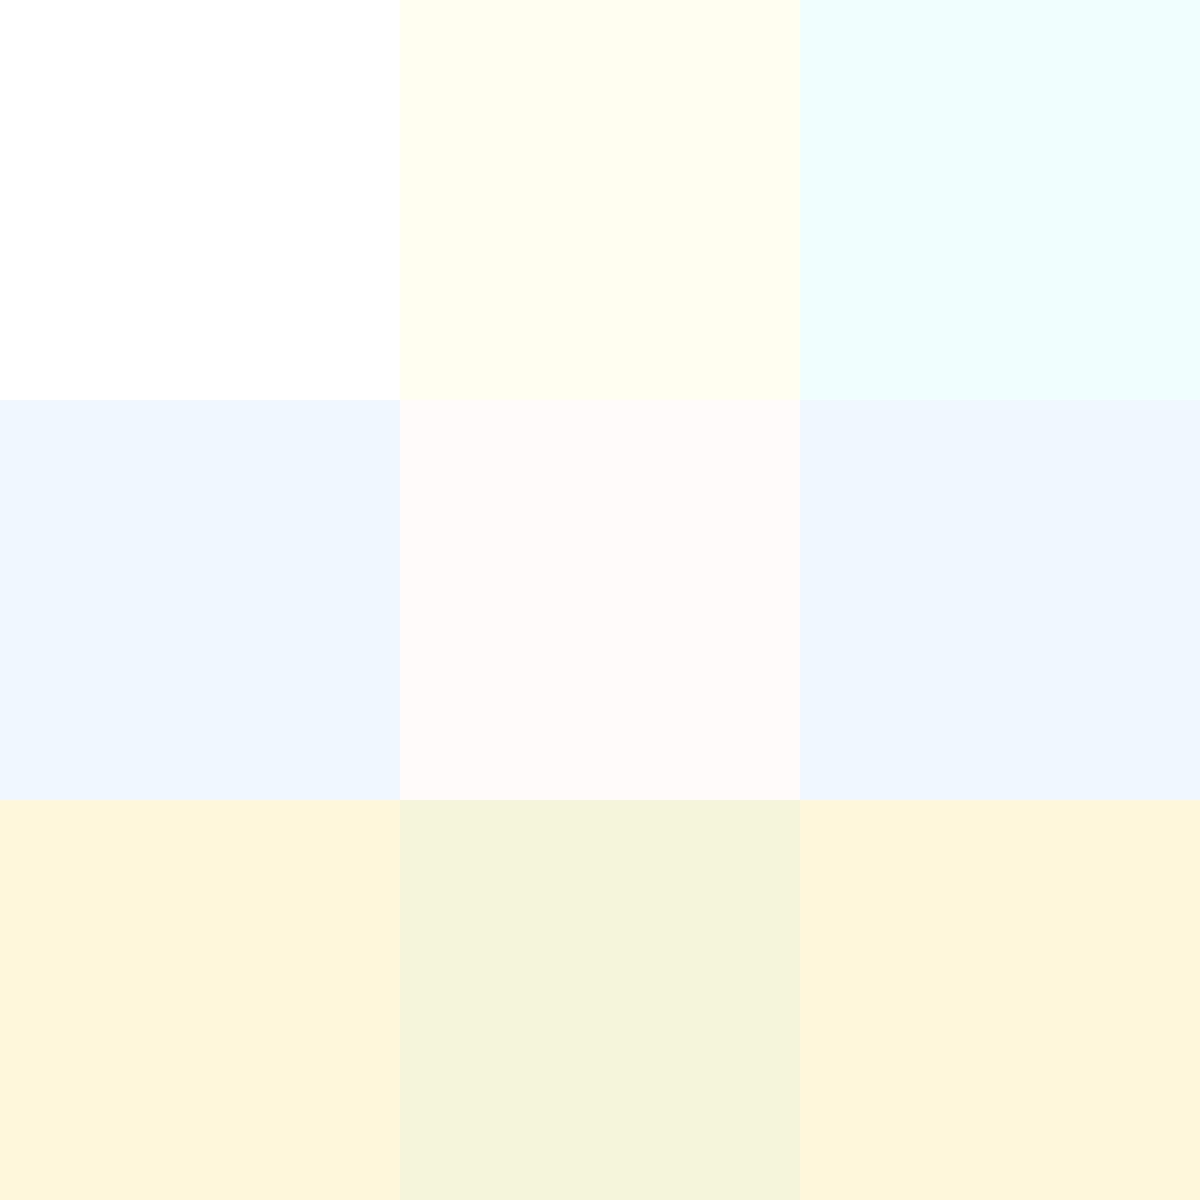 A White And Light Blue Square Pattern